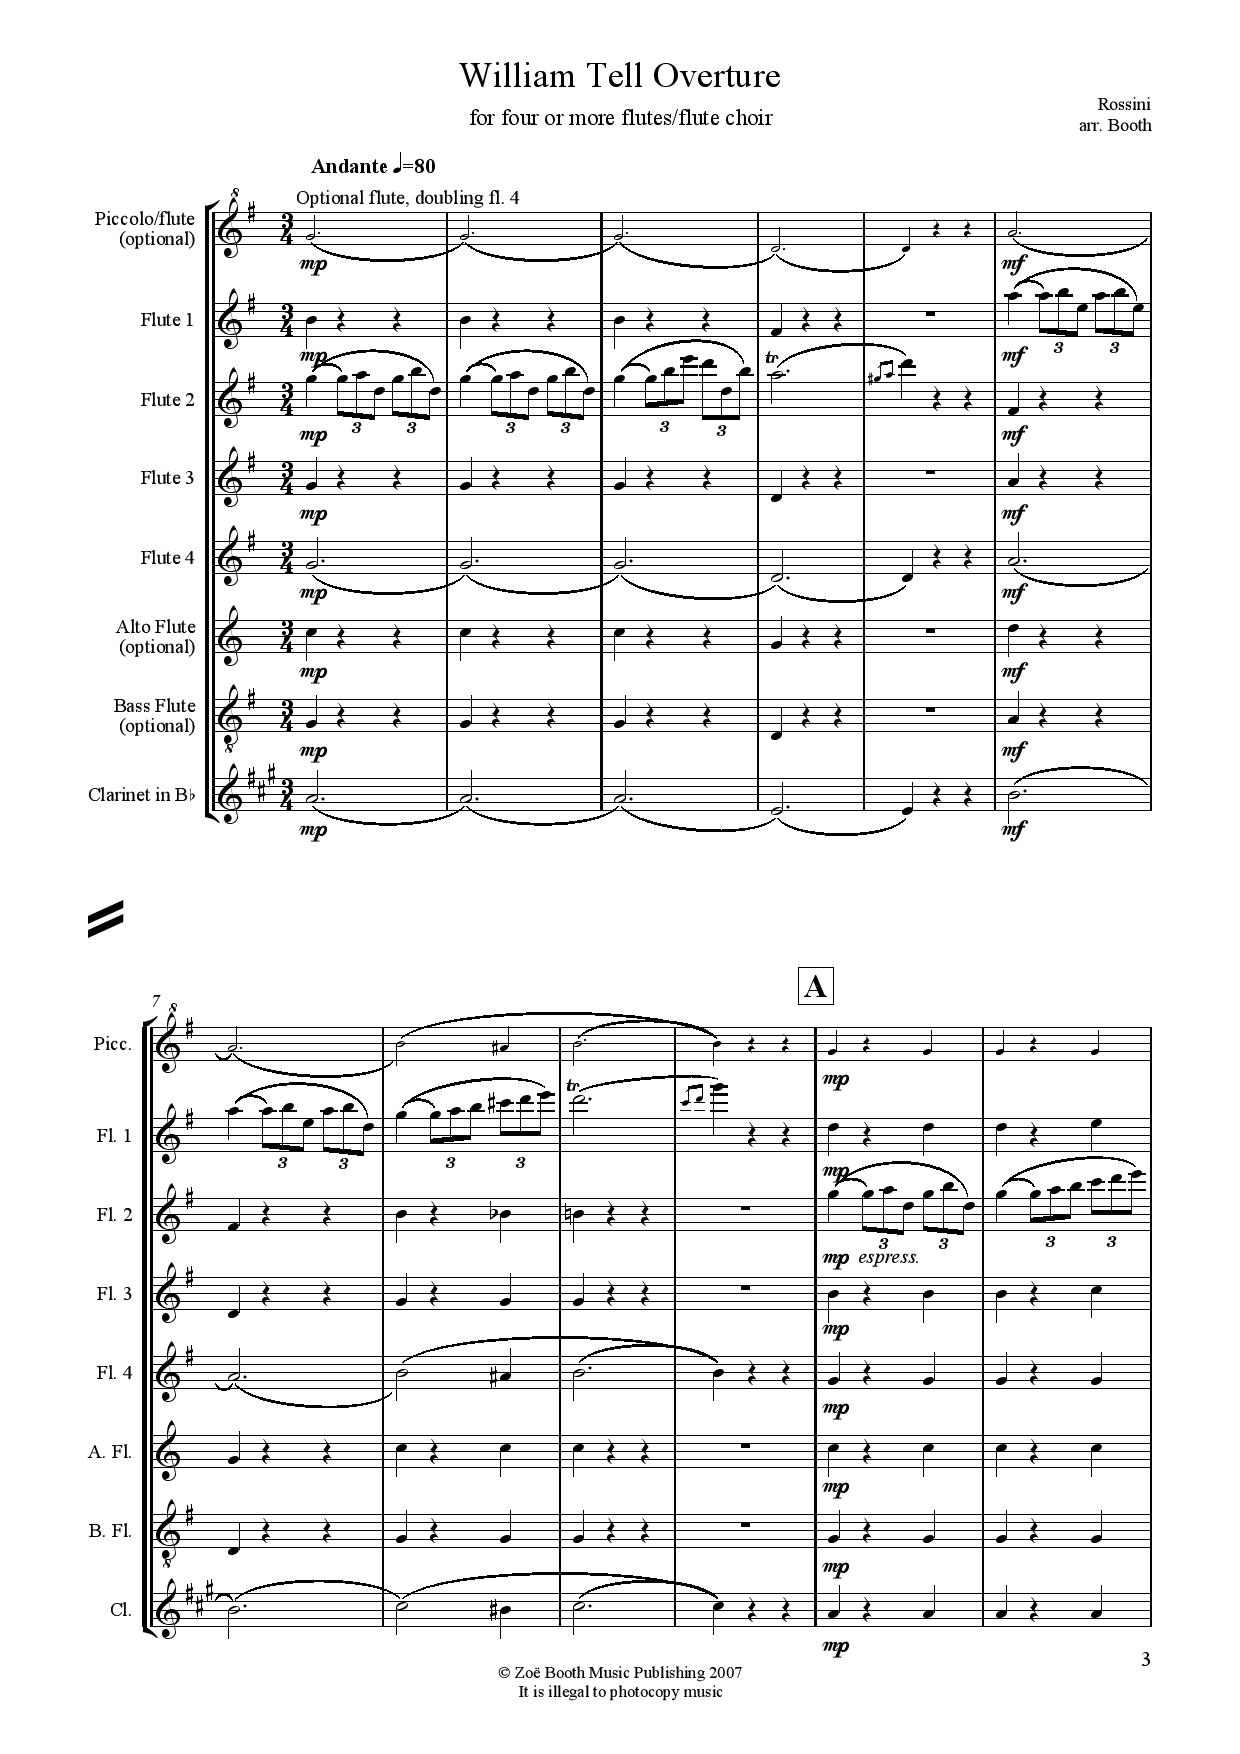 The William Tell Overture by Rossini,  arranged by Zoë Booth for four or more flutes/flute choir